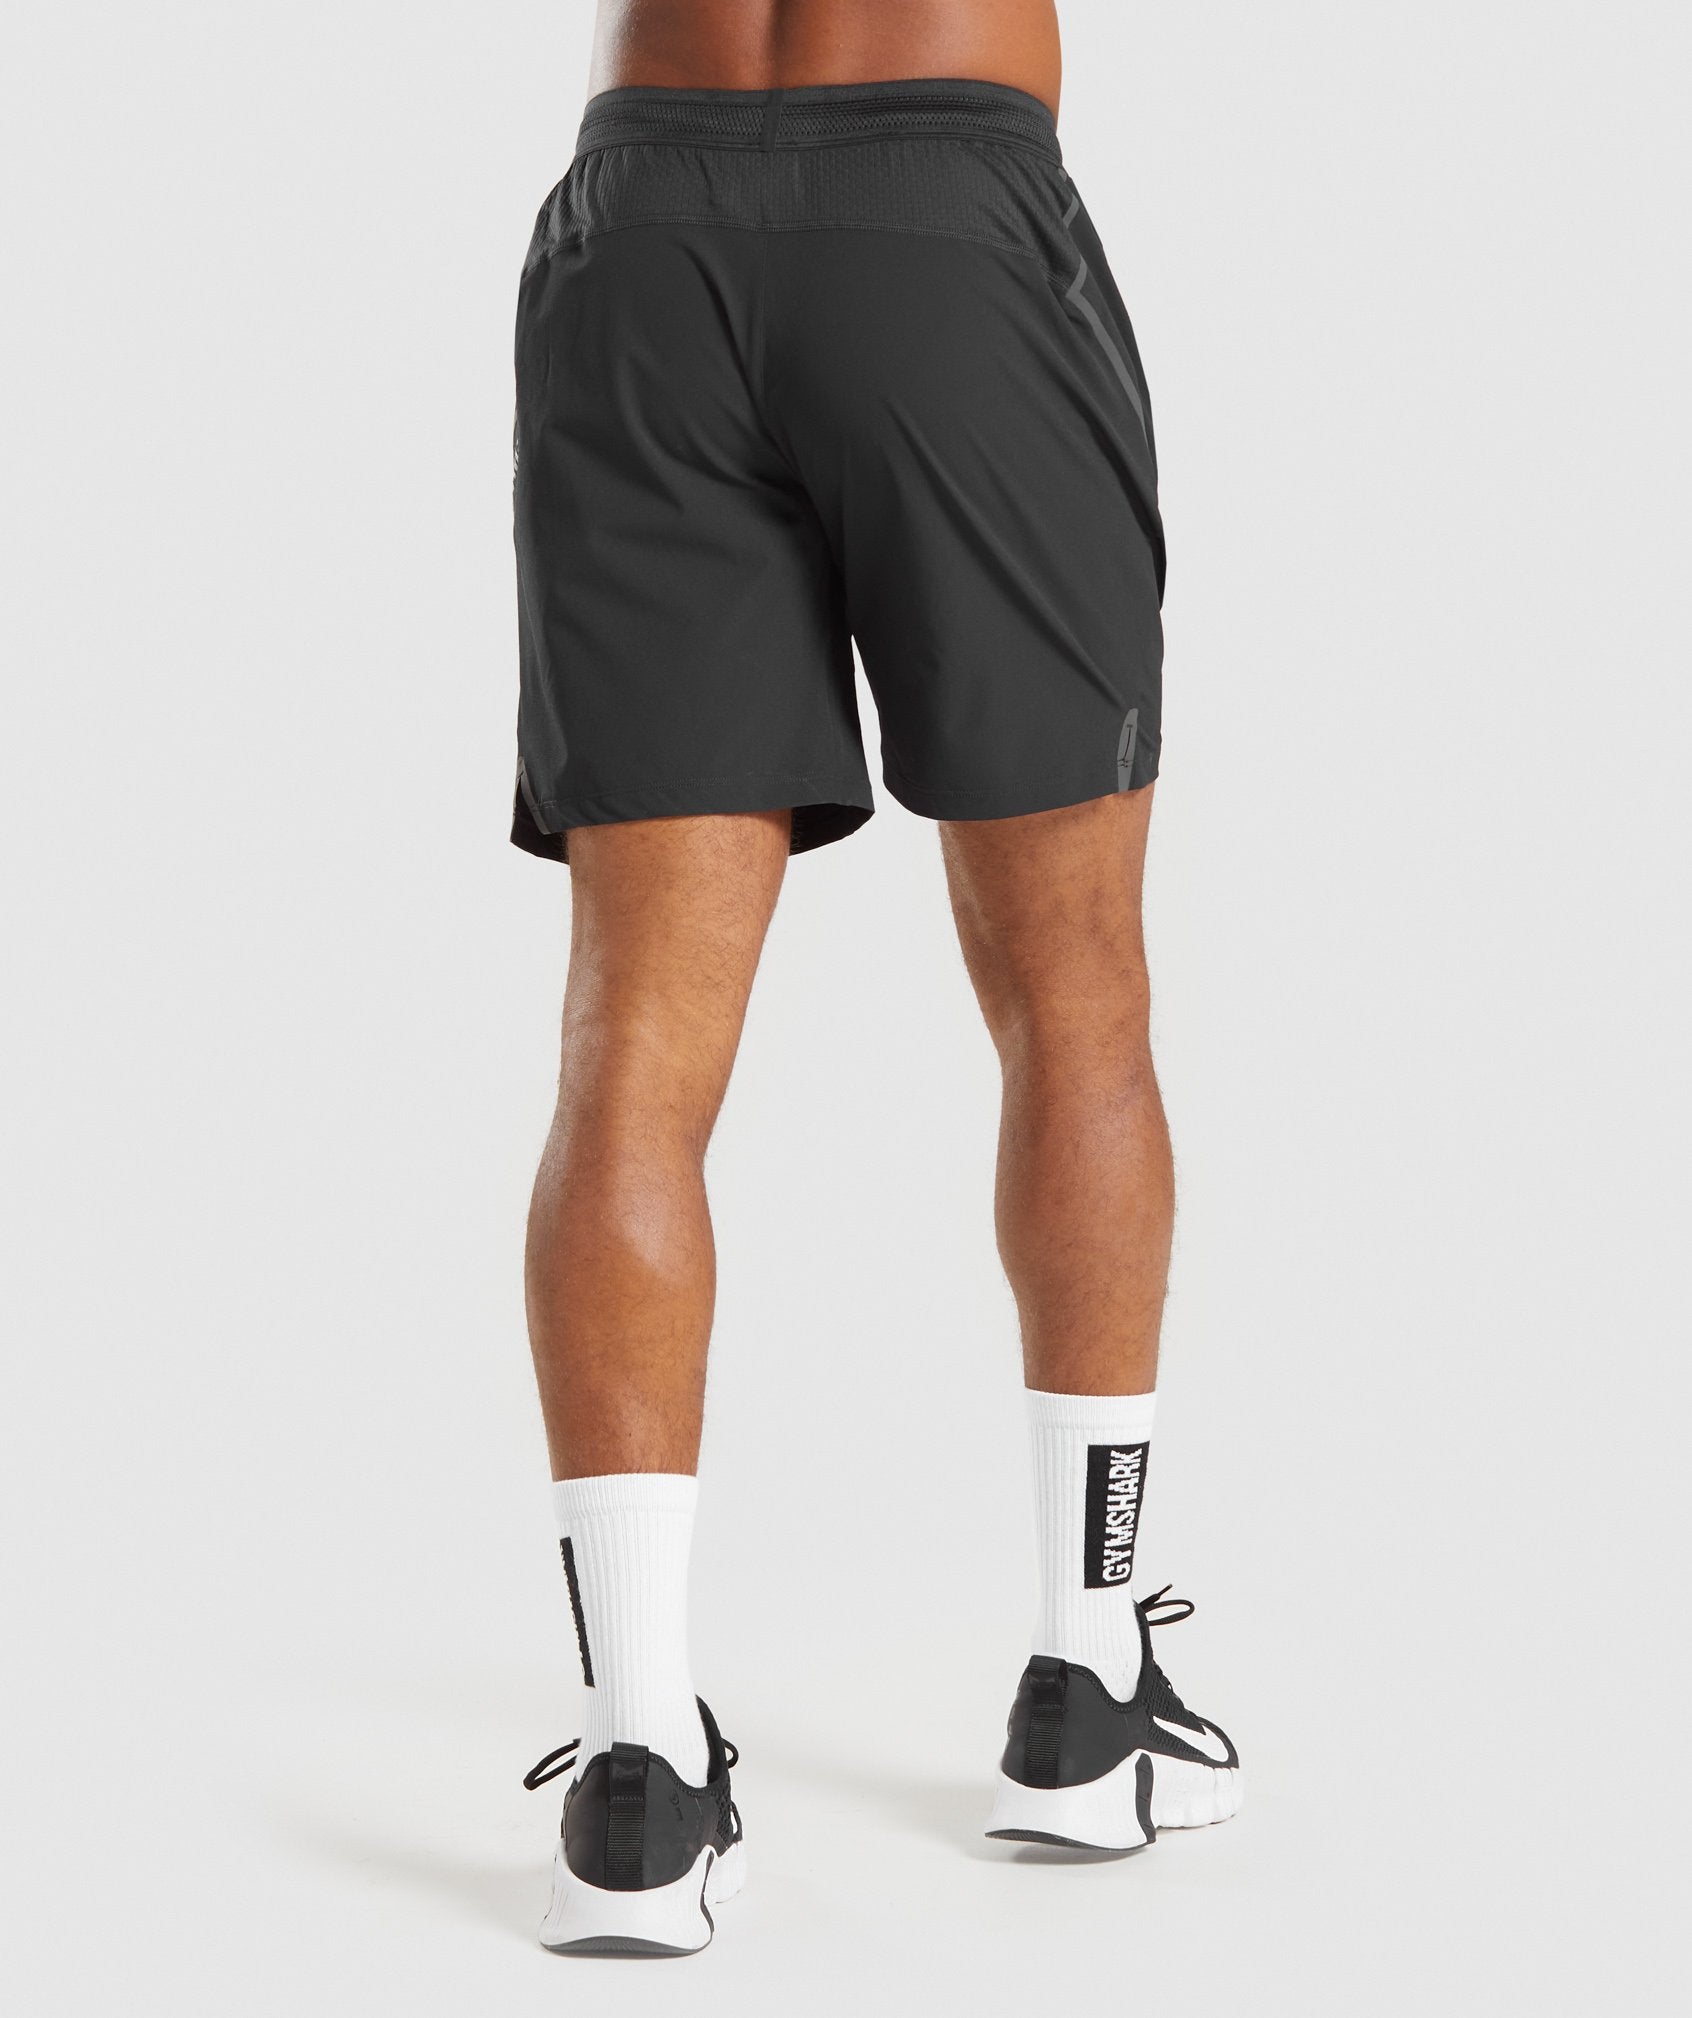 Apex Shorts in Black - view 3